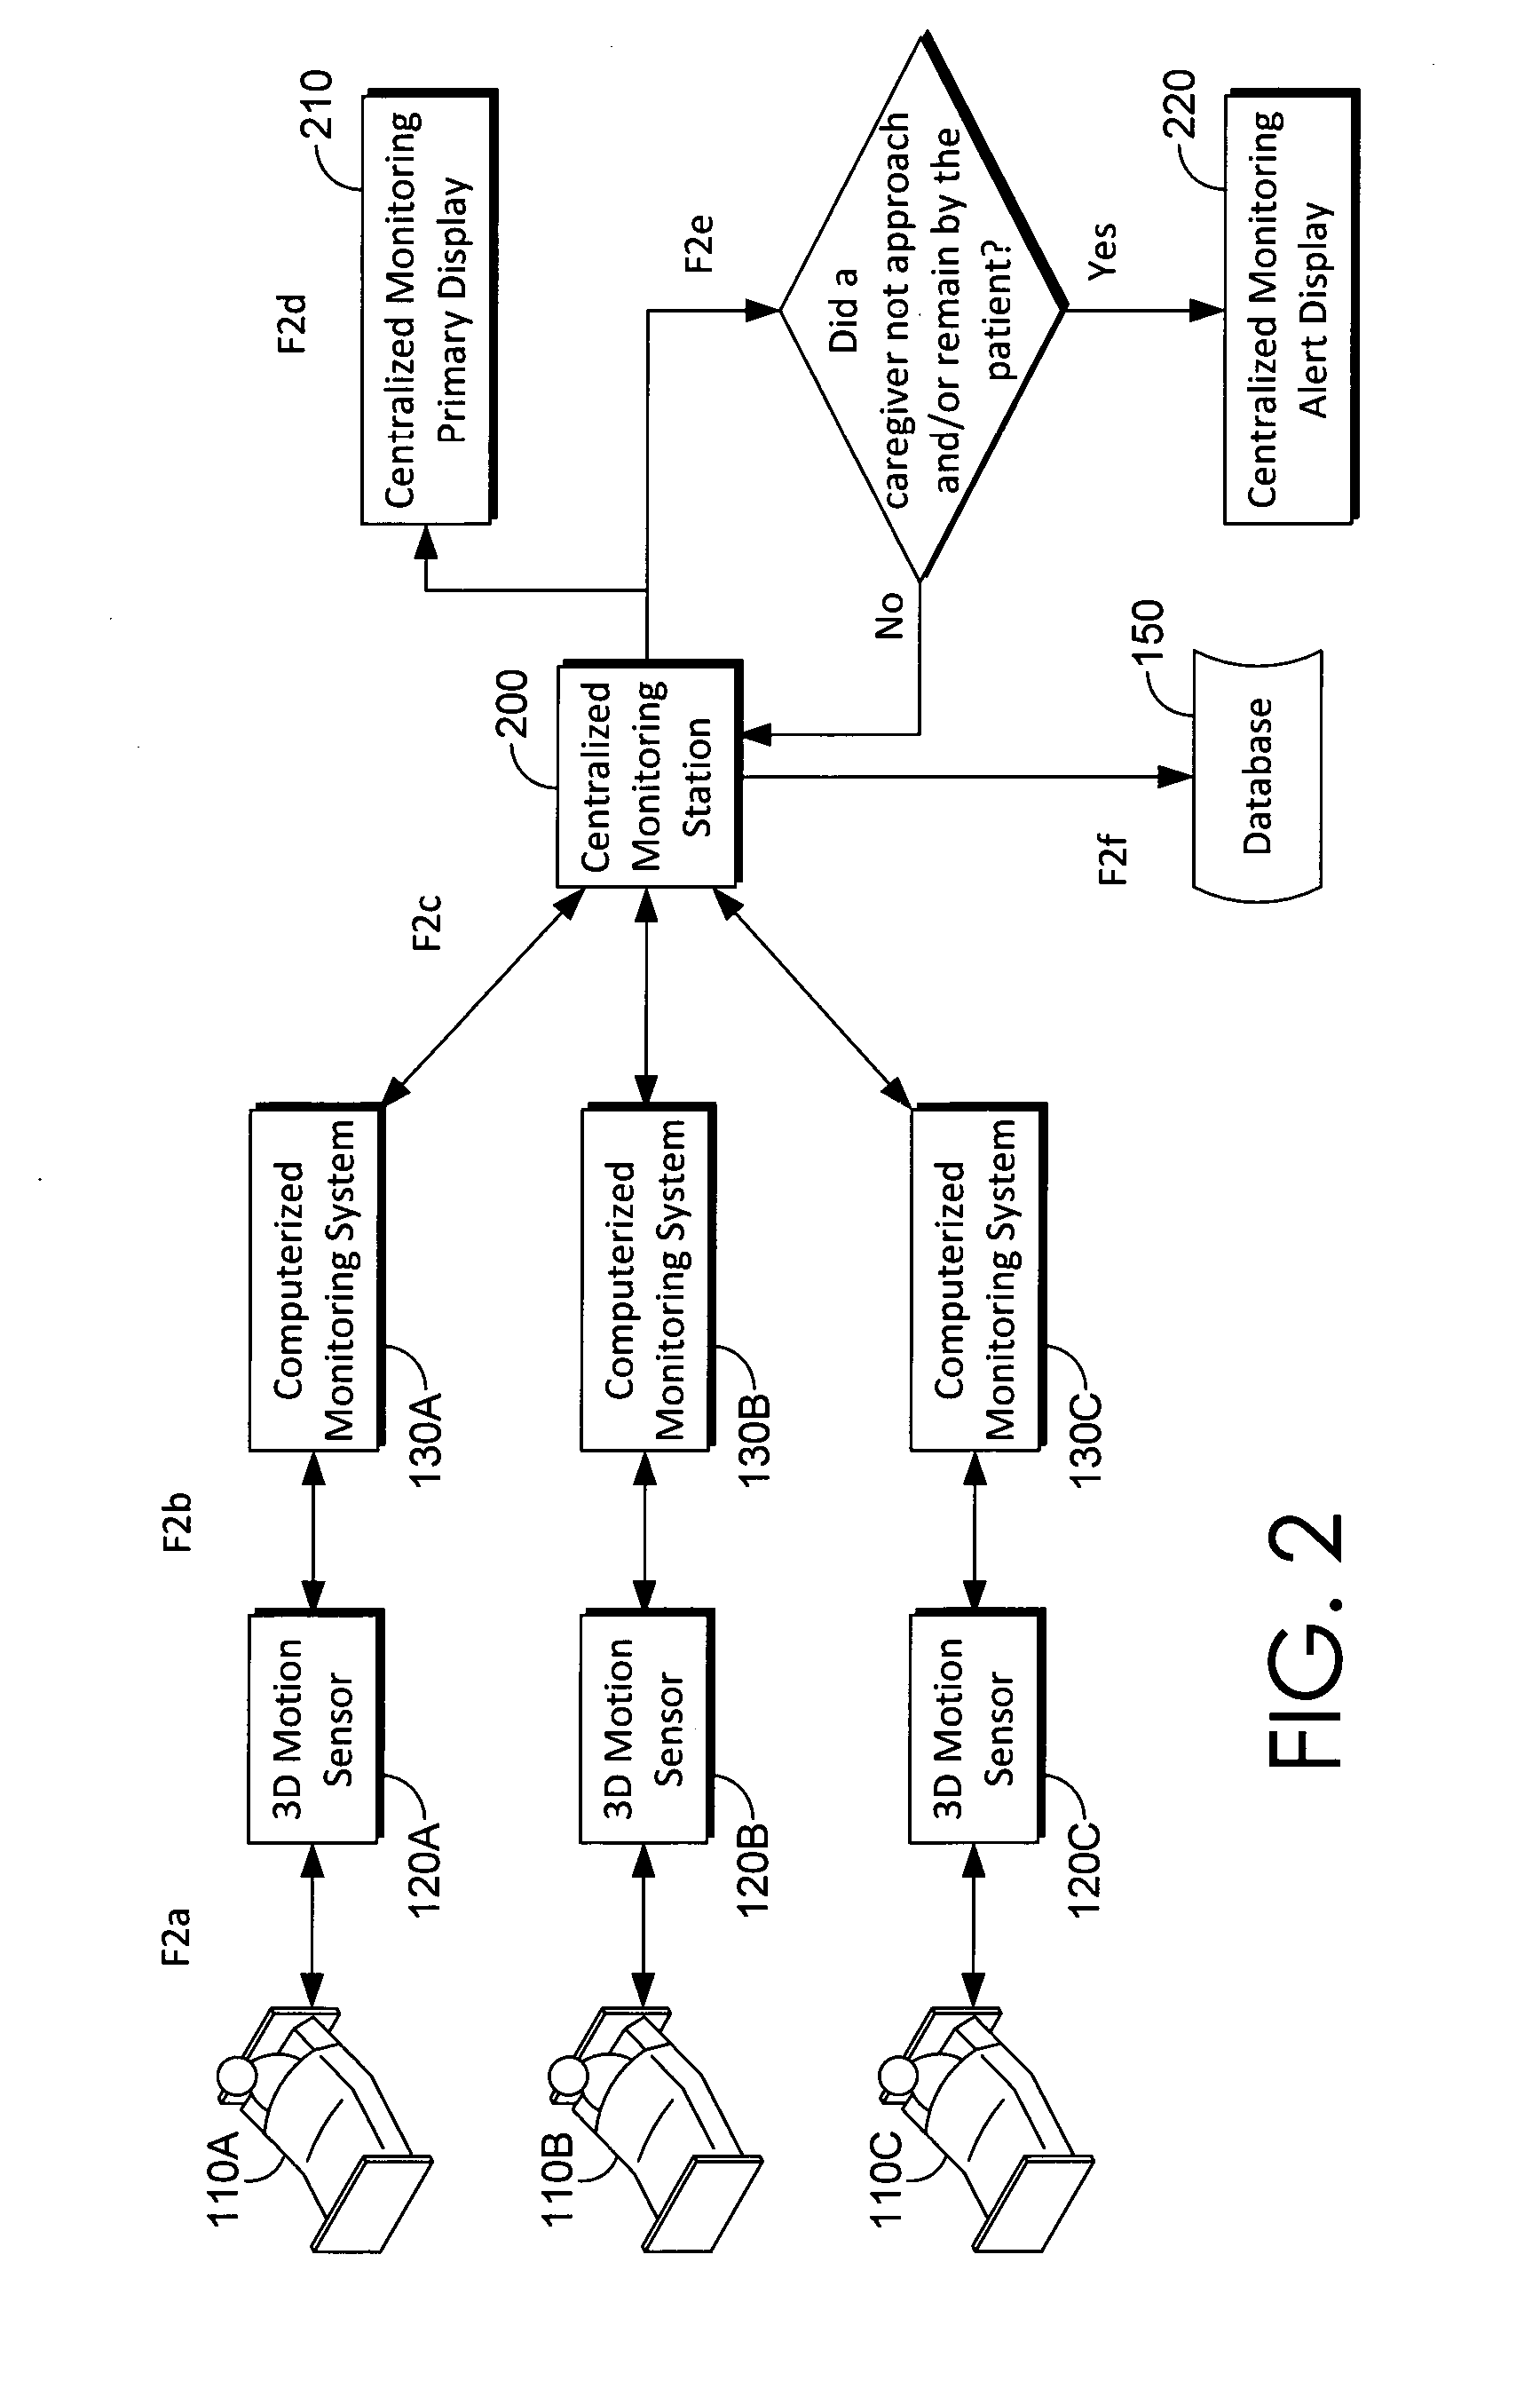 Method and system for determining whether a caregiver takes appropriate measures to prevent patient bedsores